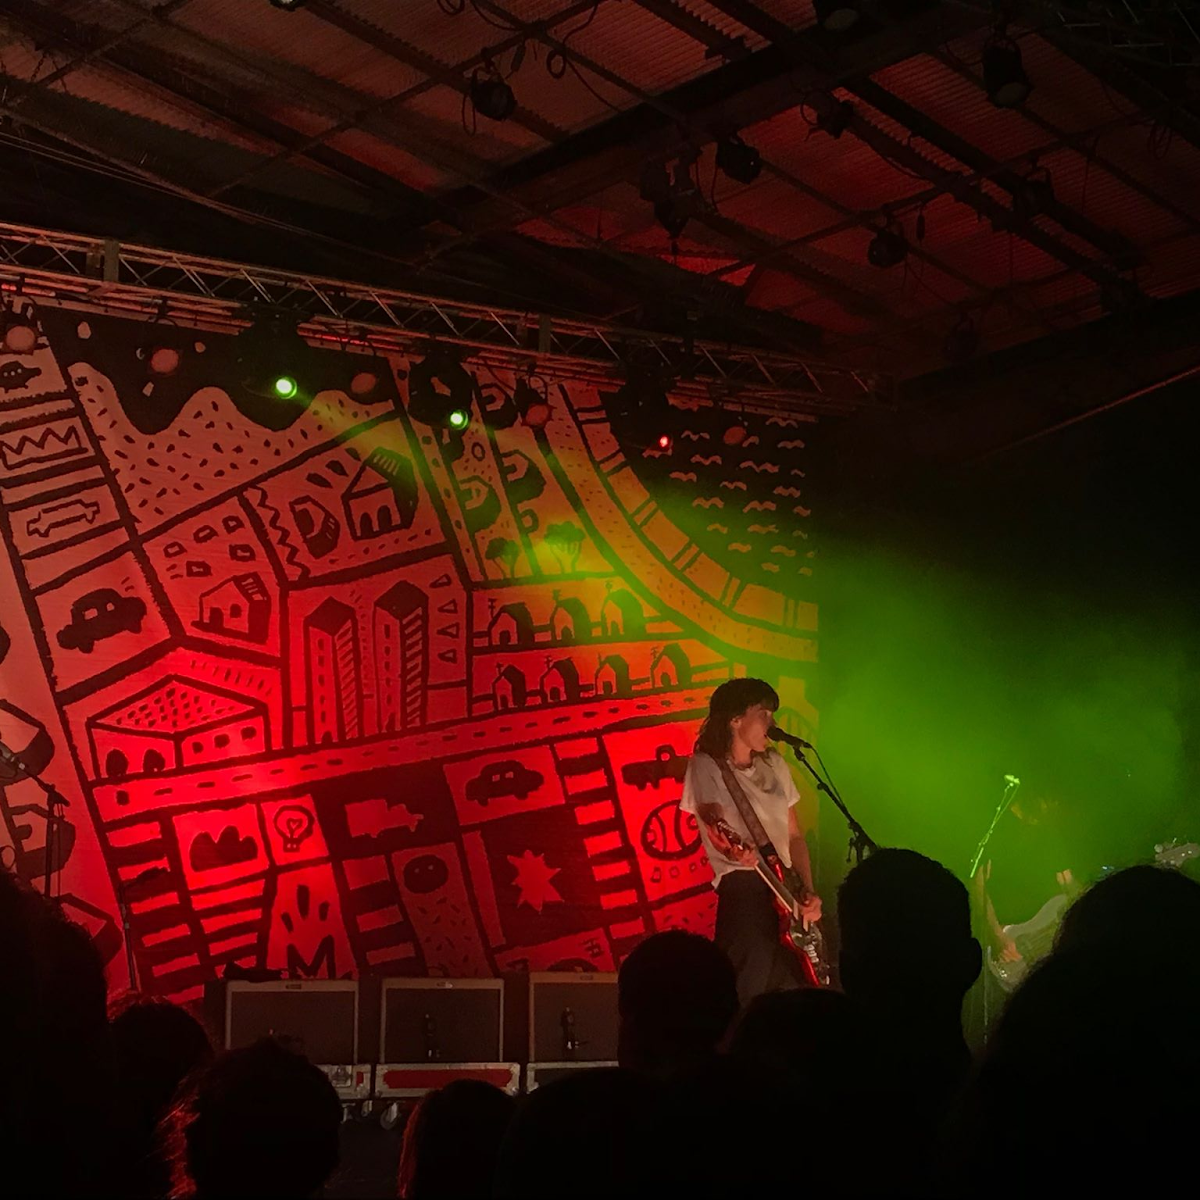 Courtney Barnett brings her tragicomic guitar storm to Raleigh | Review by Harris Wheless